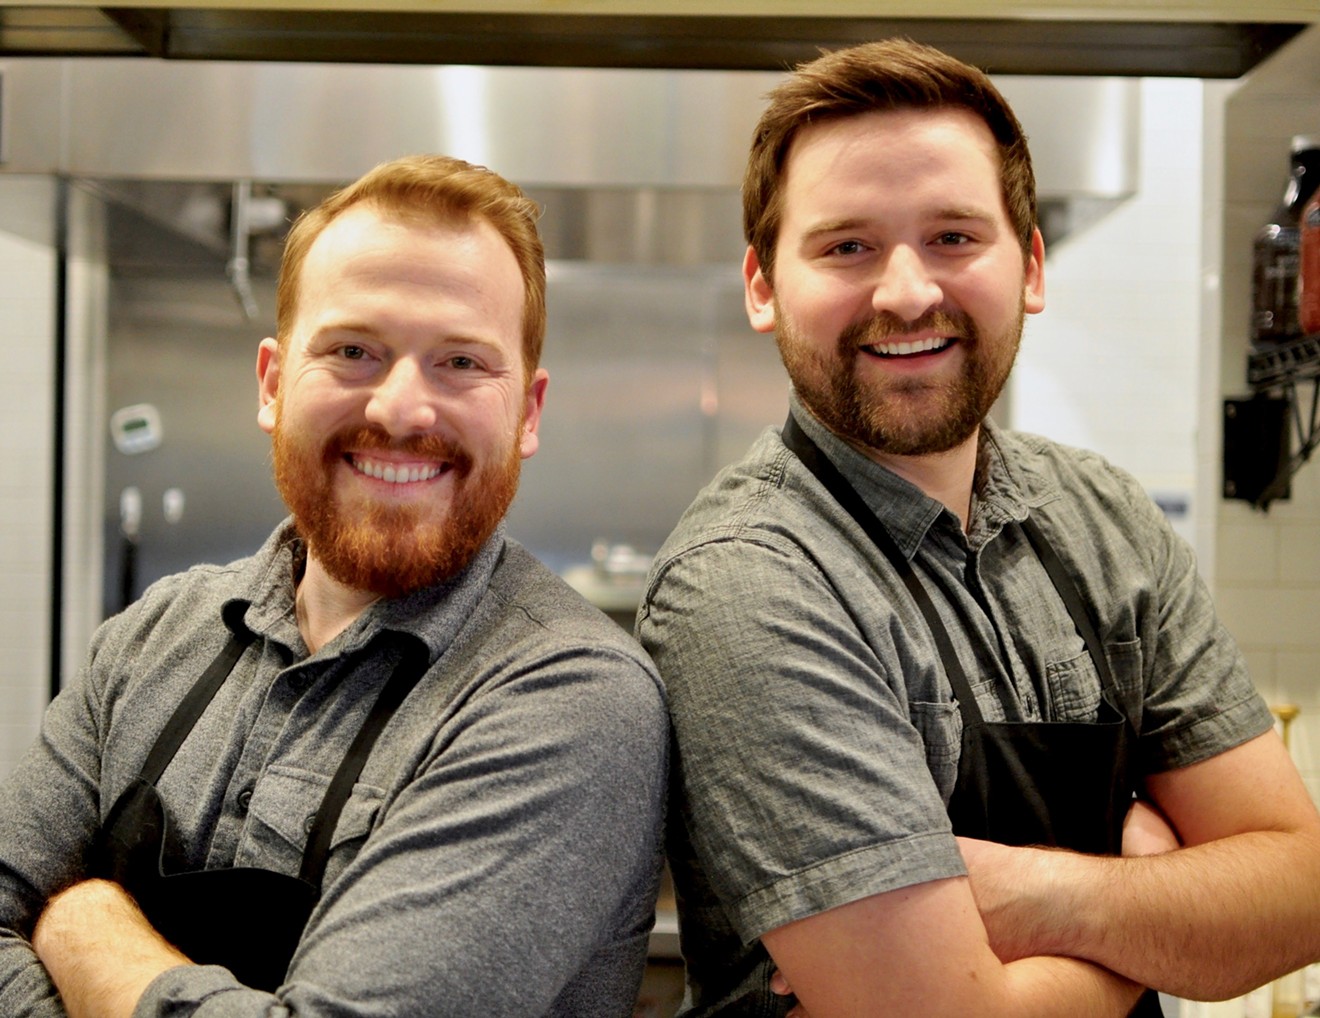 Brothers Bryan (left) and Caleb Lewis, owners of Press Waffle Co., will be on ABC's "Shark Tank" this weekend.